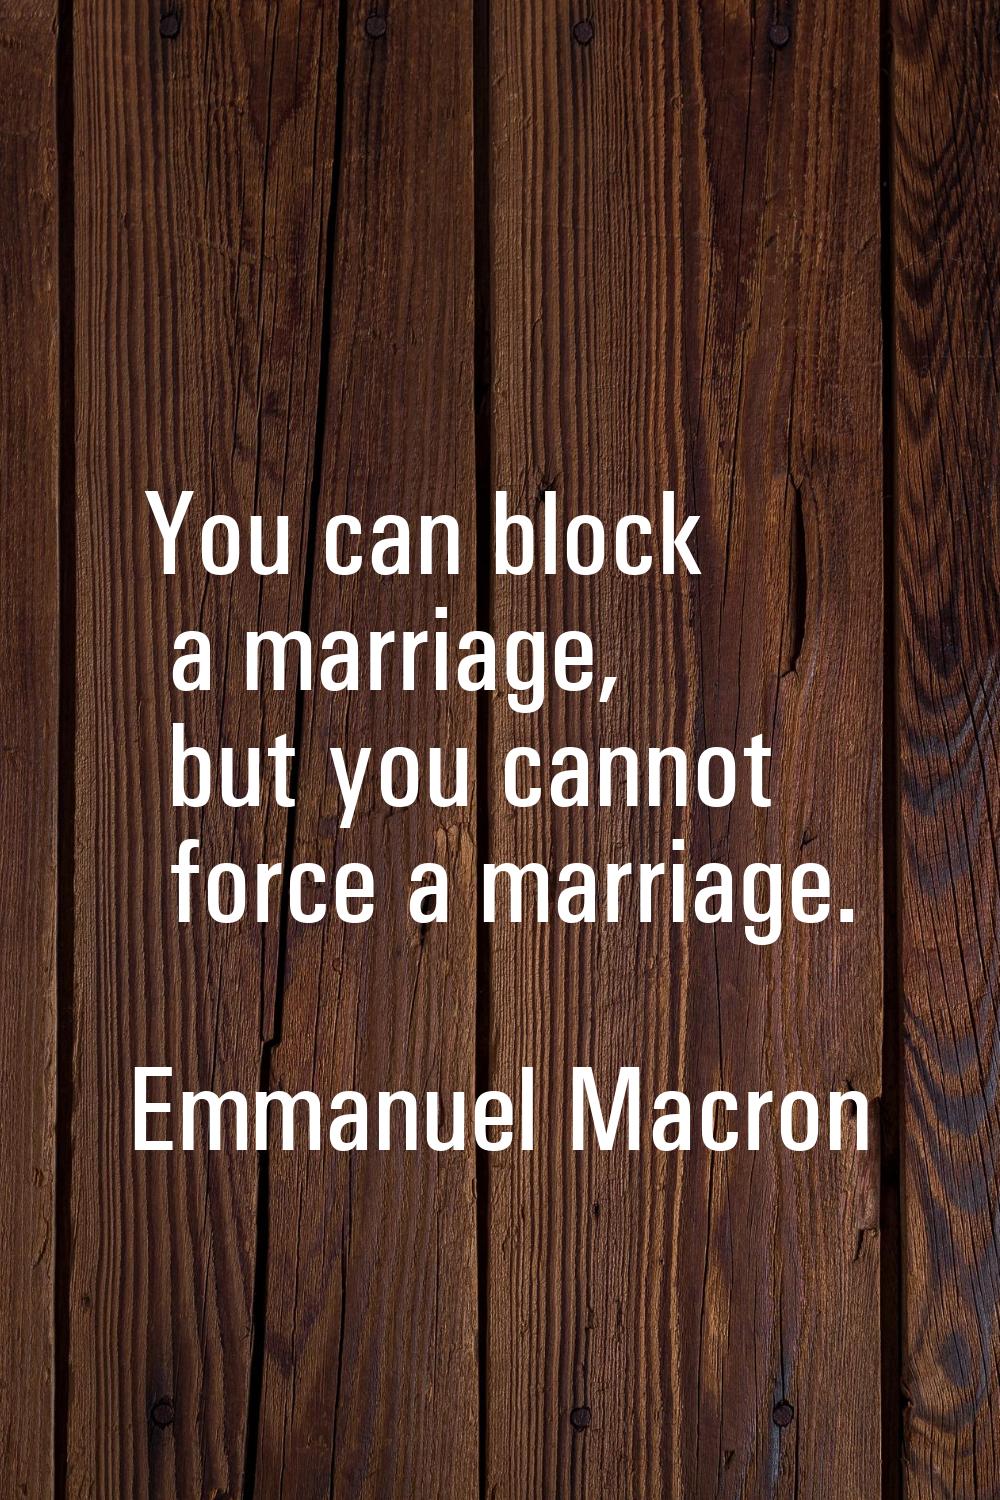 You can block a marriage, but you cannot force a marriage.